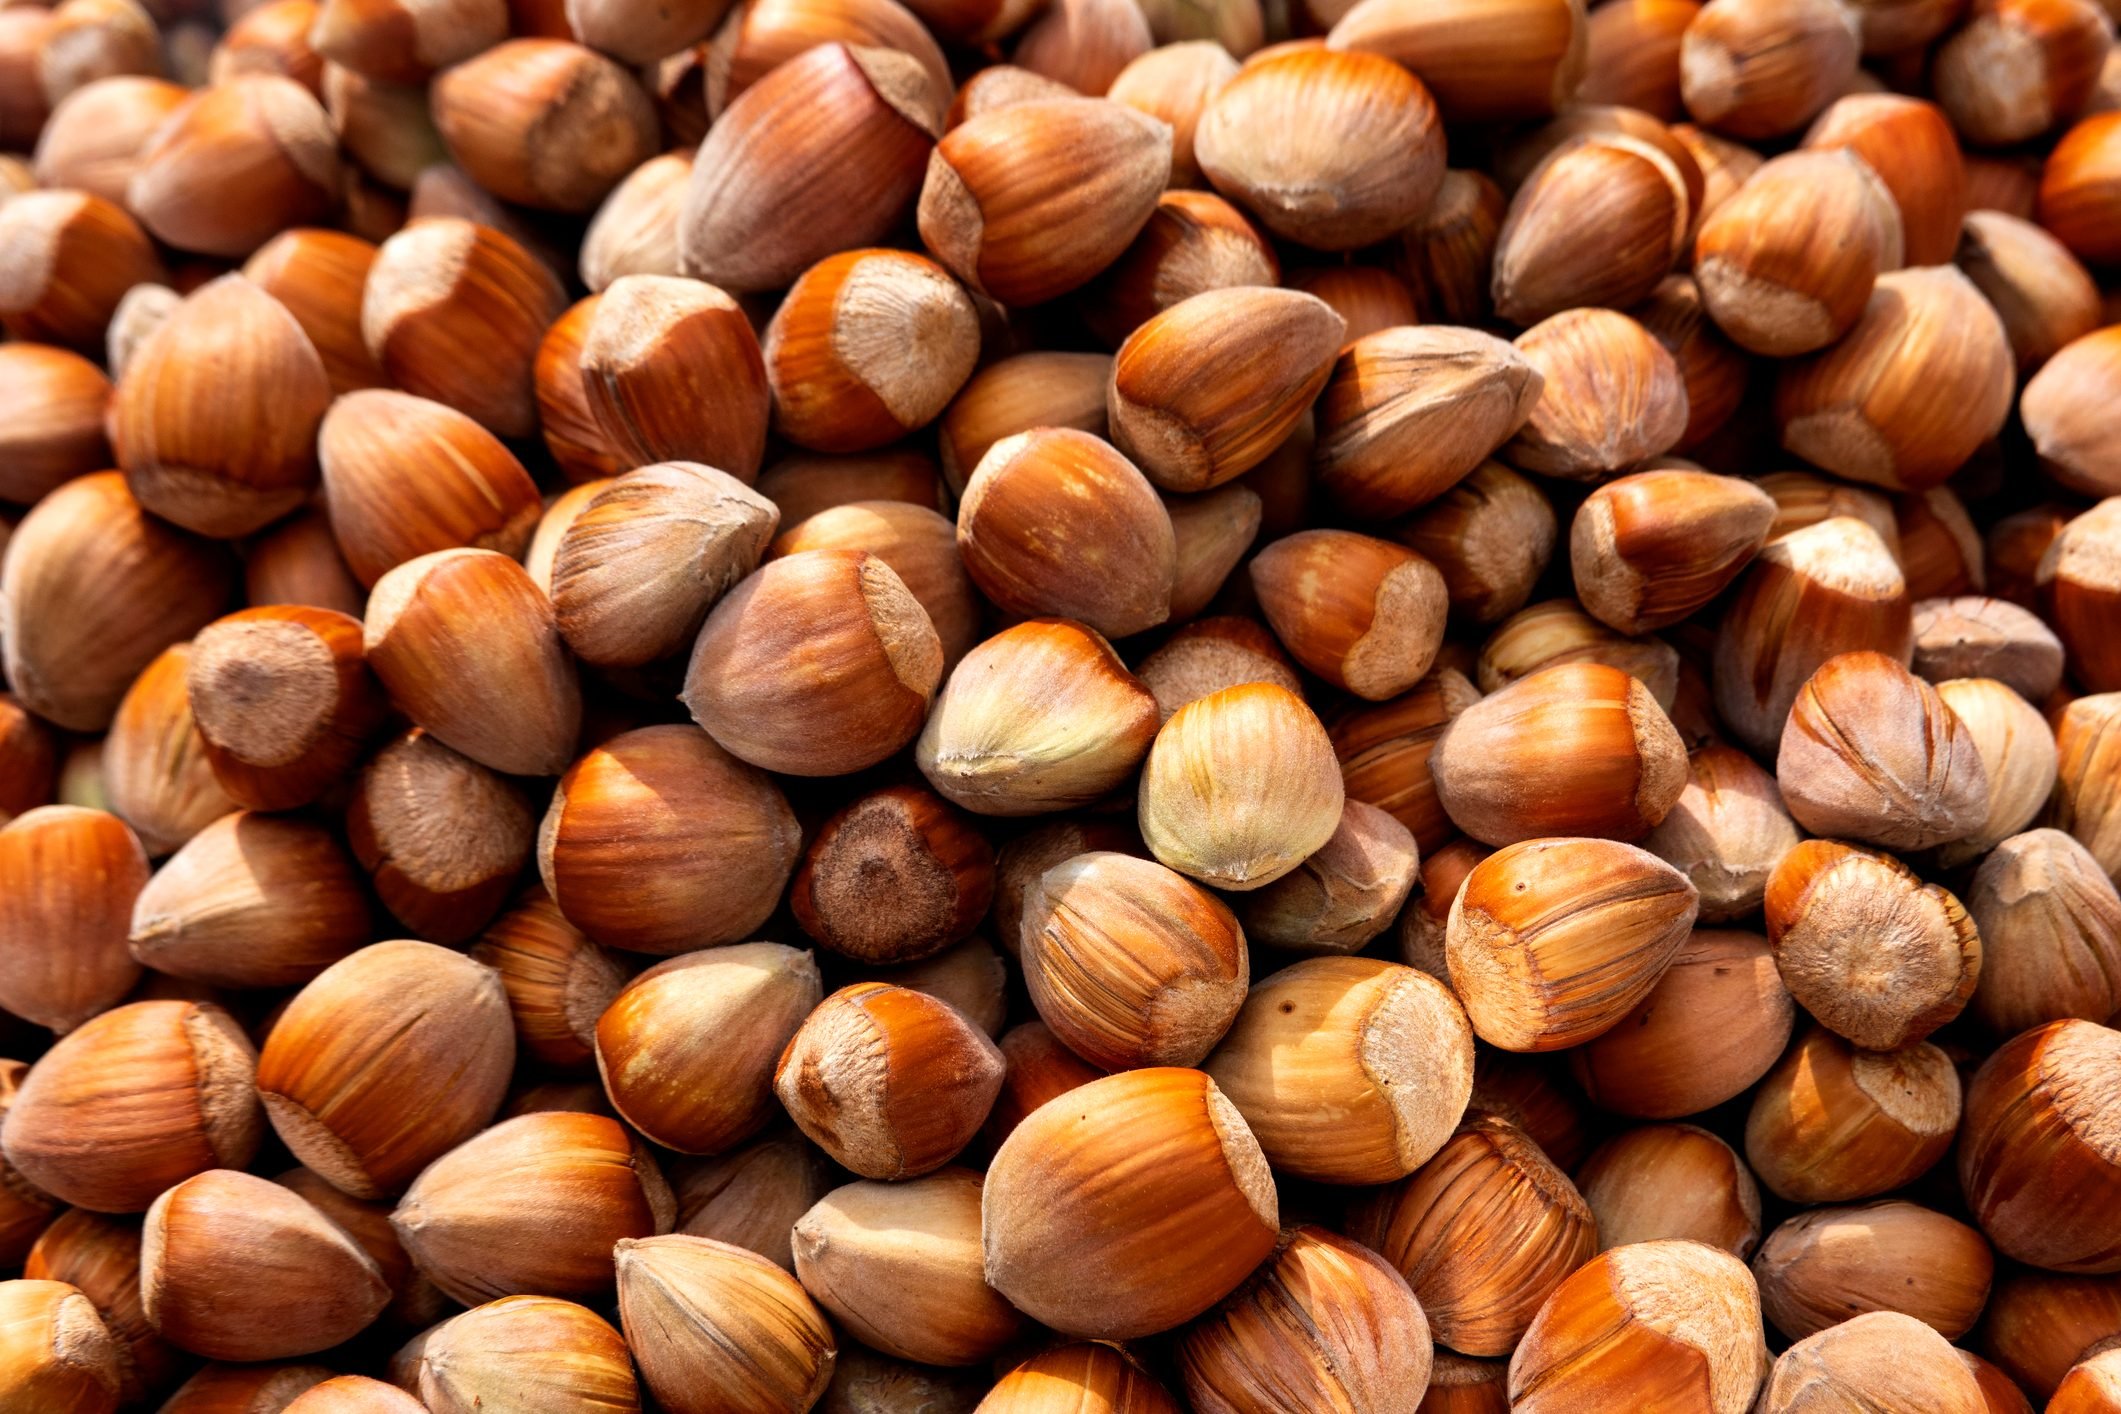 Are Hazelnuts Healthy? Here's What Nutritionists Say